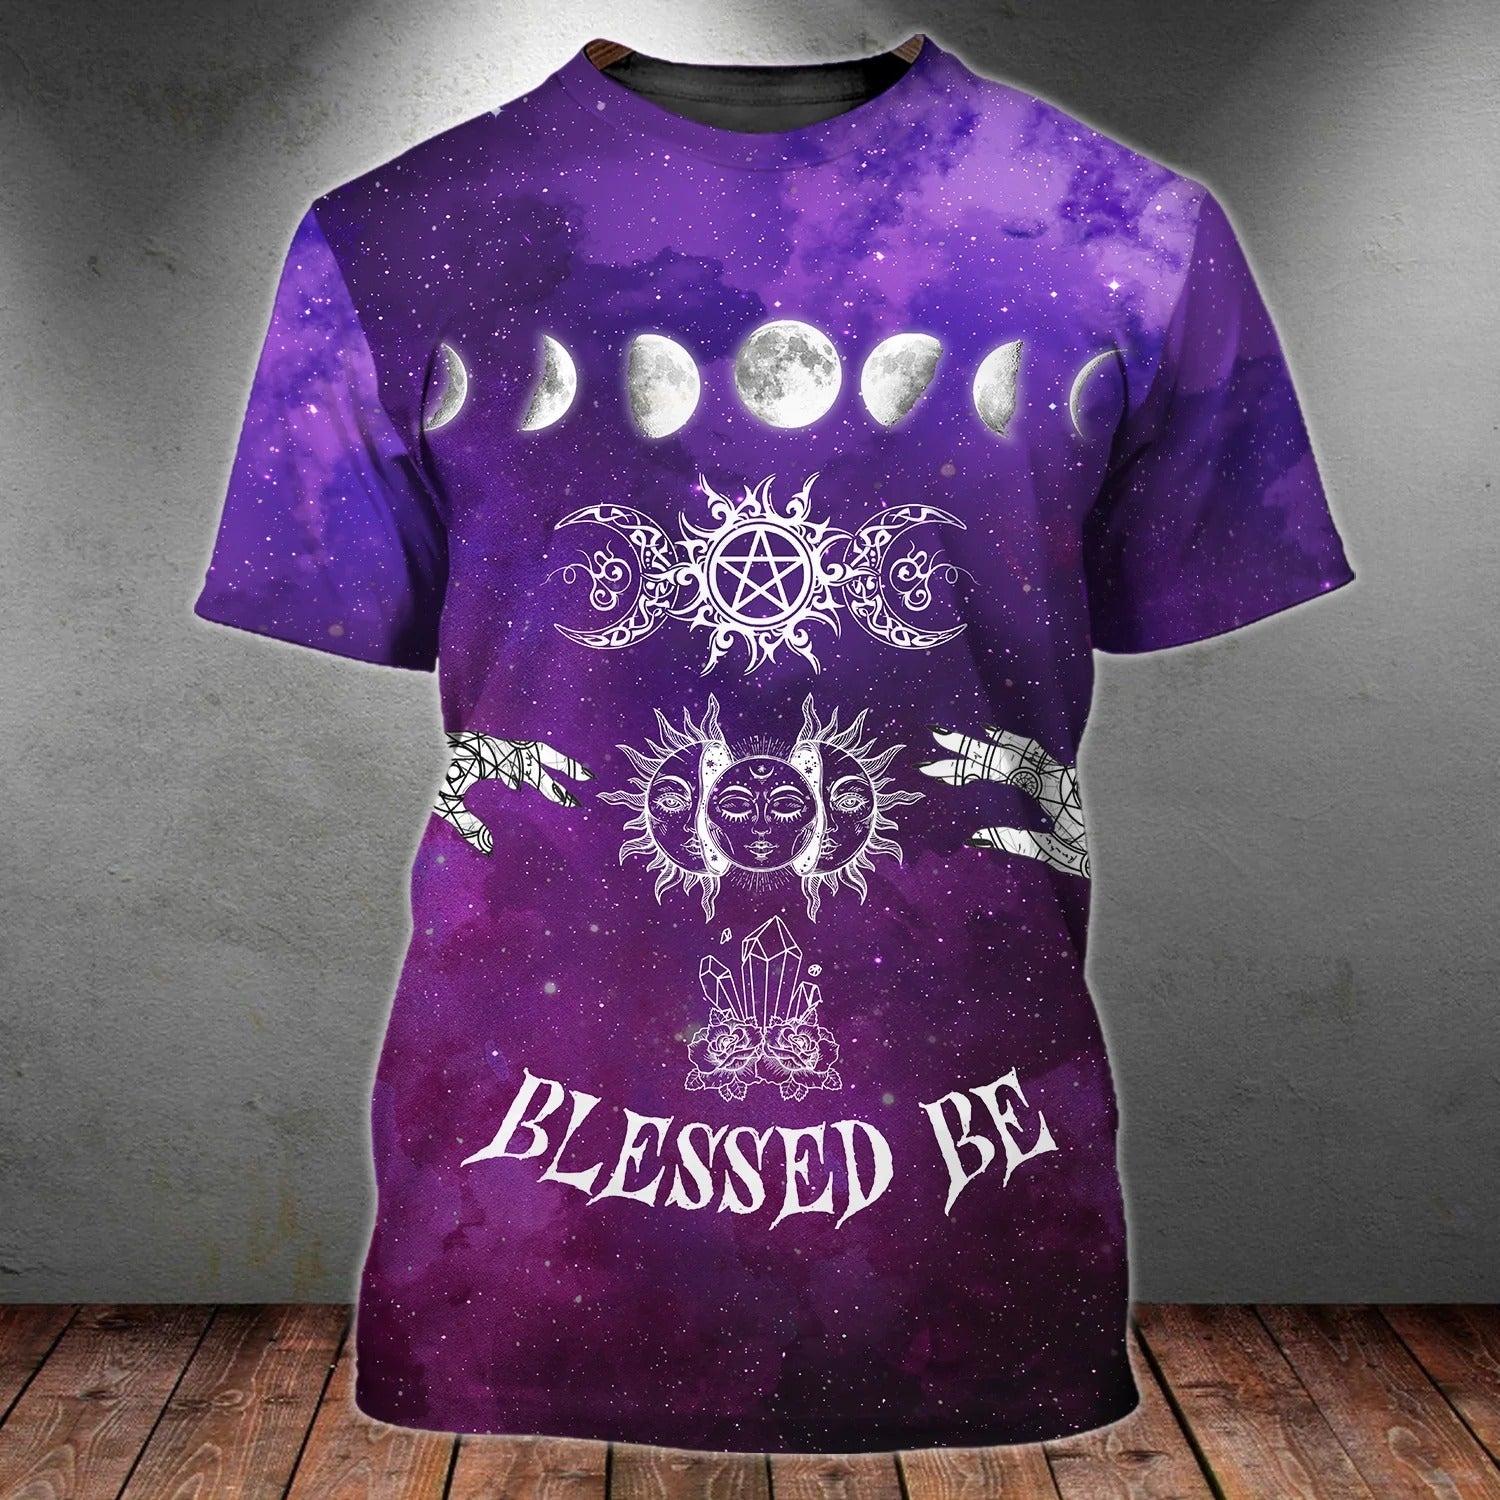 3D Printed Purple Tshirt For Halloween/ Halloween The Soul Of A Witch Unisex Premium Shirts